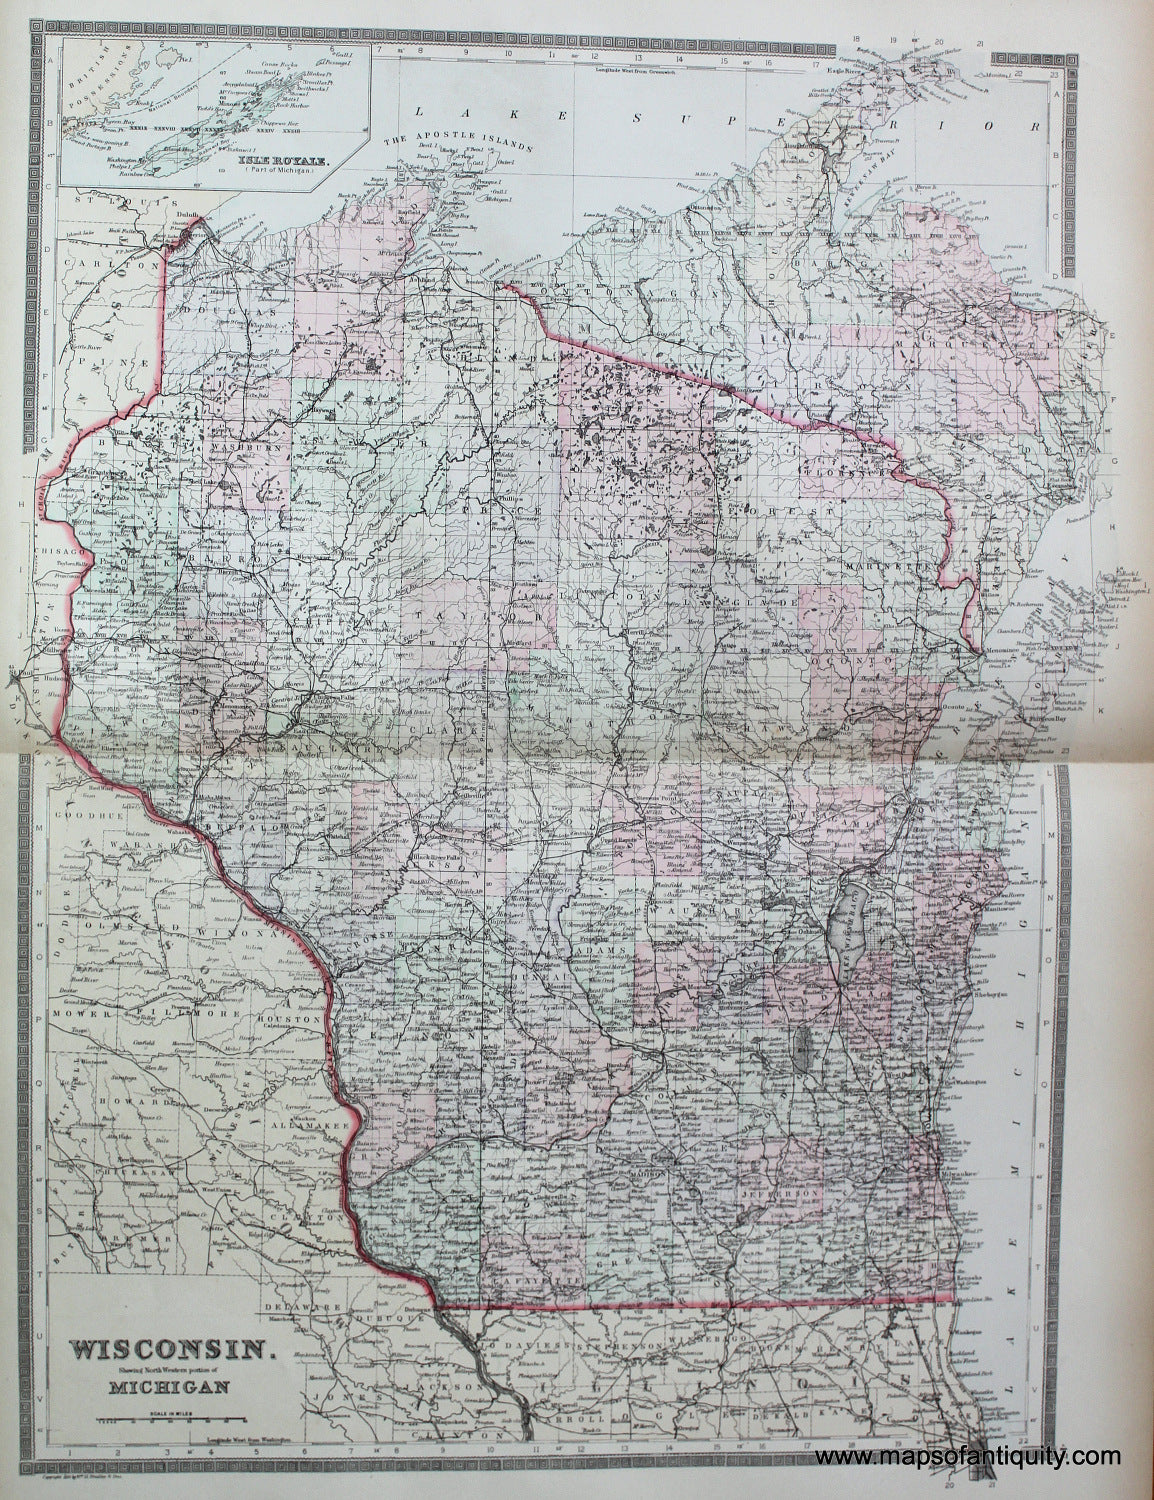 Antique-Hand-Colored-Map-Wisconsin.-Showing-North-Western-portion-of-Michigan-**********-United-States-Mid-West-1887-Bradley-Maps-Of-Antiquity